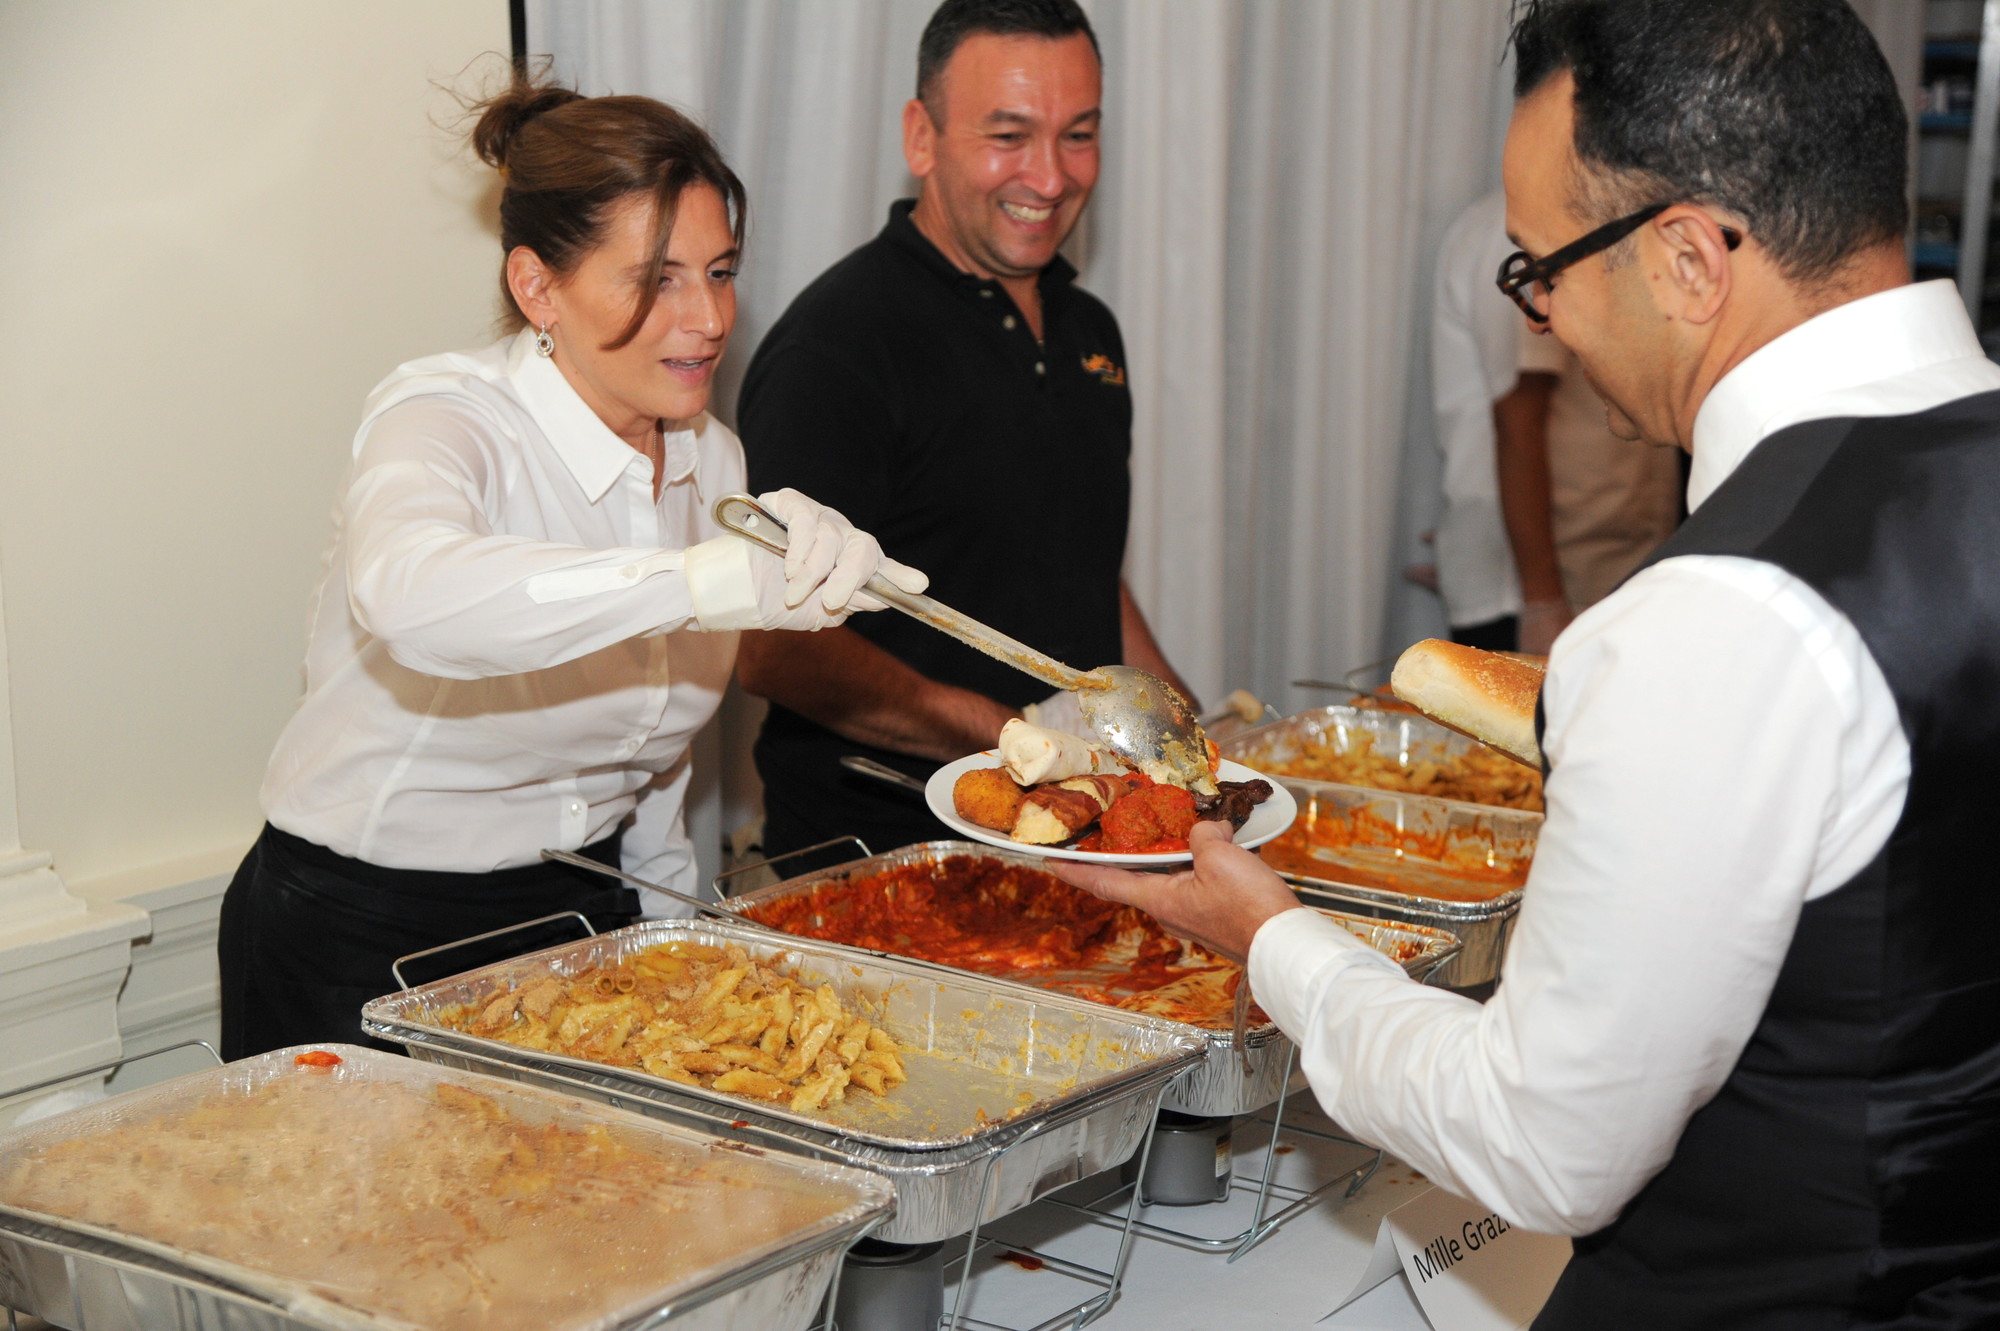 Joann and Jono Aronson, from Millie Grazie, served a variety of Italian foods at the East Meadow Chamber of Commerce Culinary Delights fundraiser on Monday.